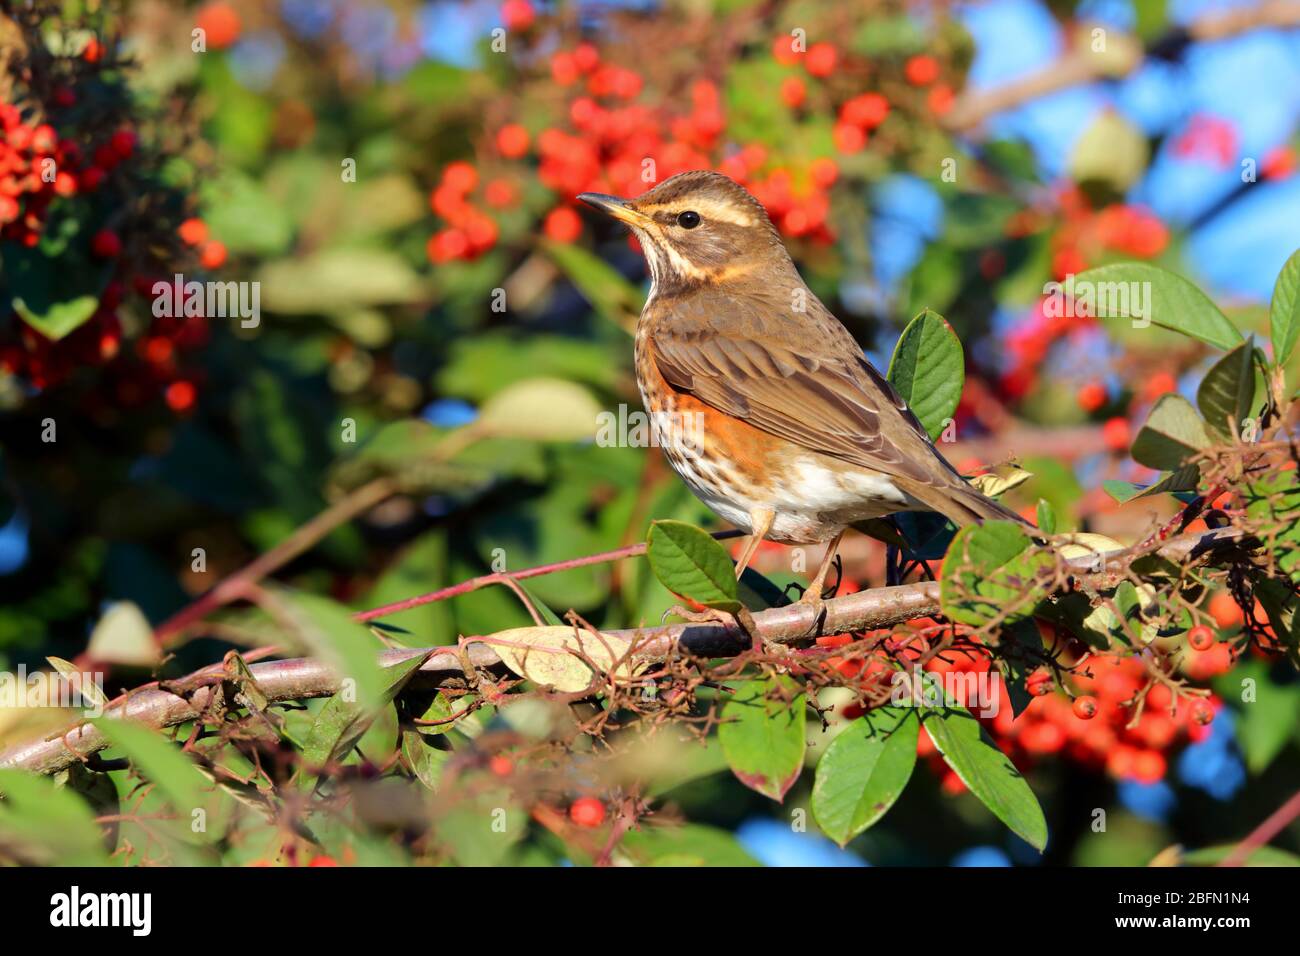 An adult Redwing (Turdus iliacus), a small thrush species and winter visitor to the UK, feeding in a berry bush in England Stock Photo